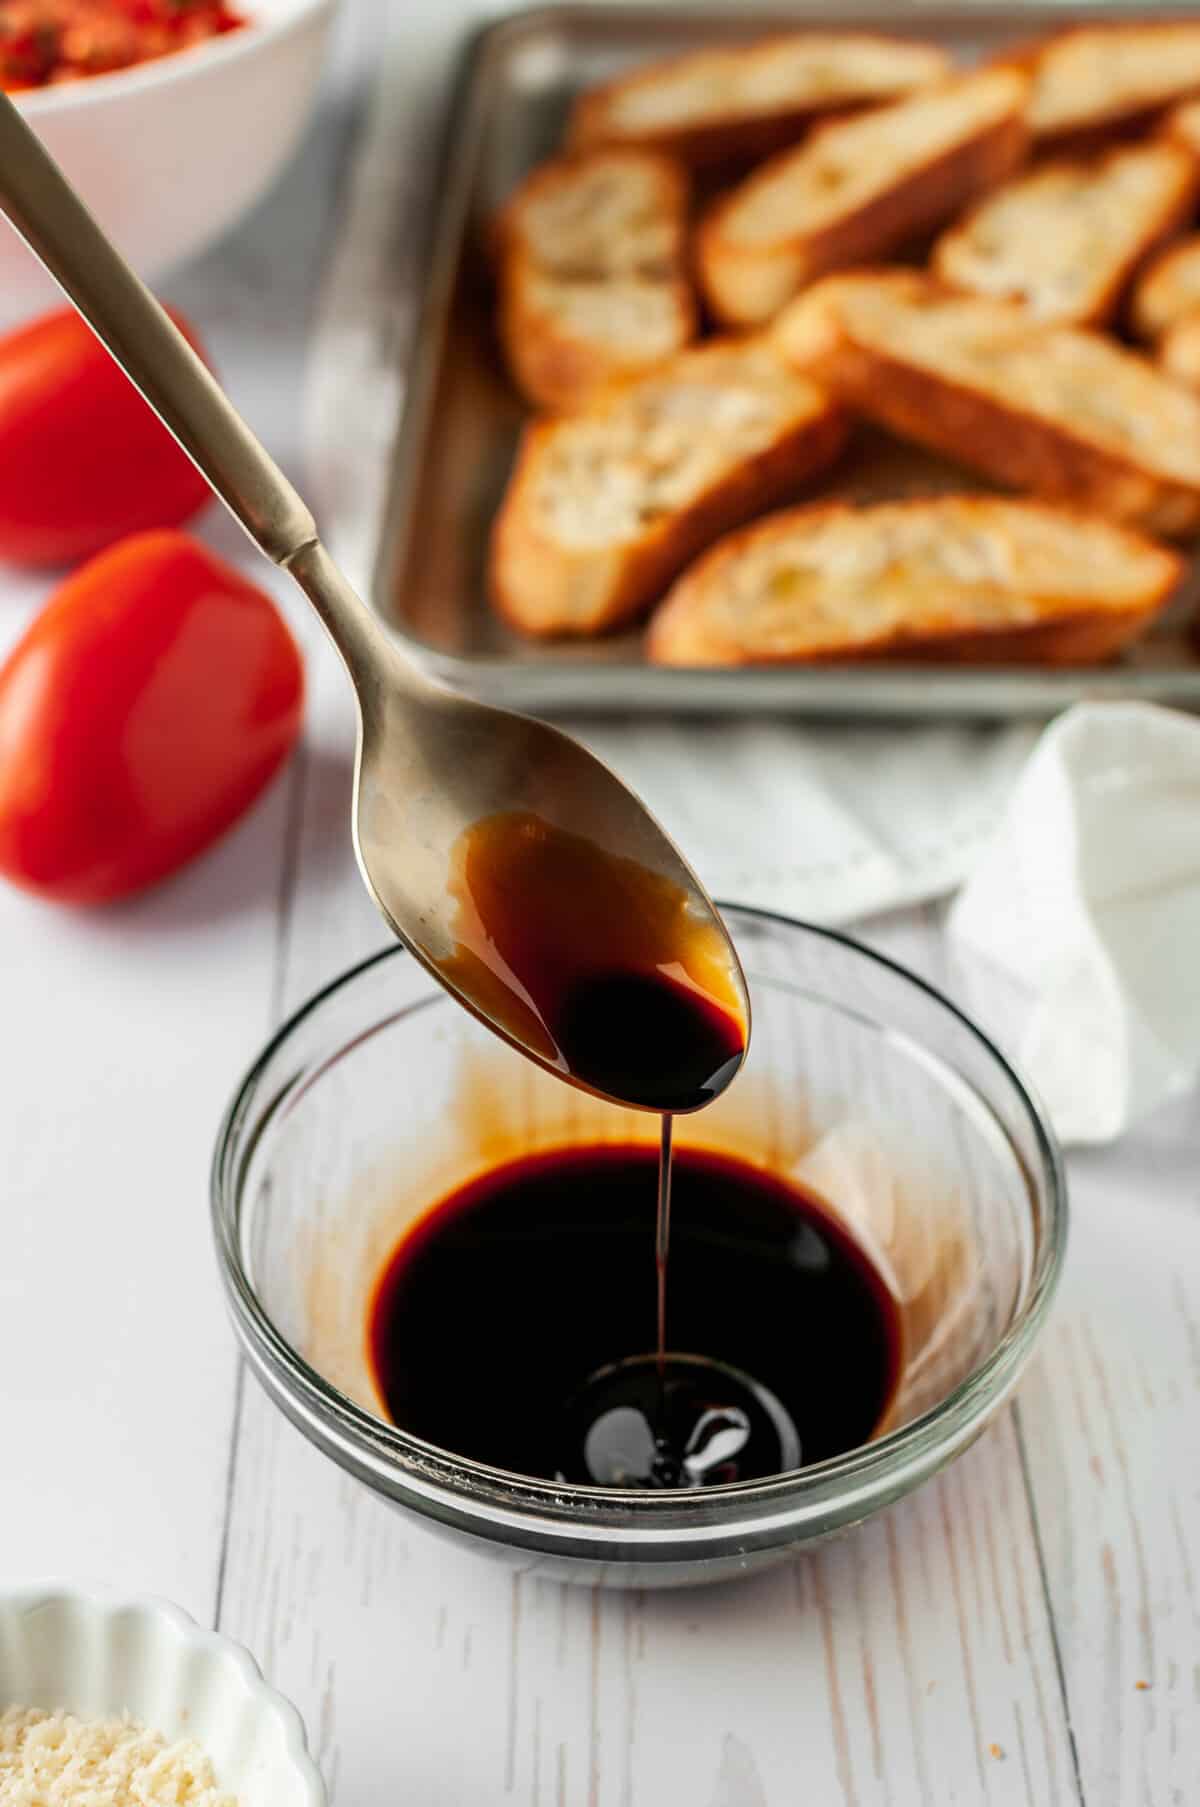 Spoon of balsamic reduction dripping into small glass bowl